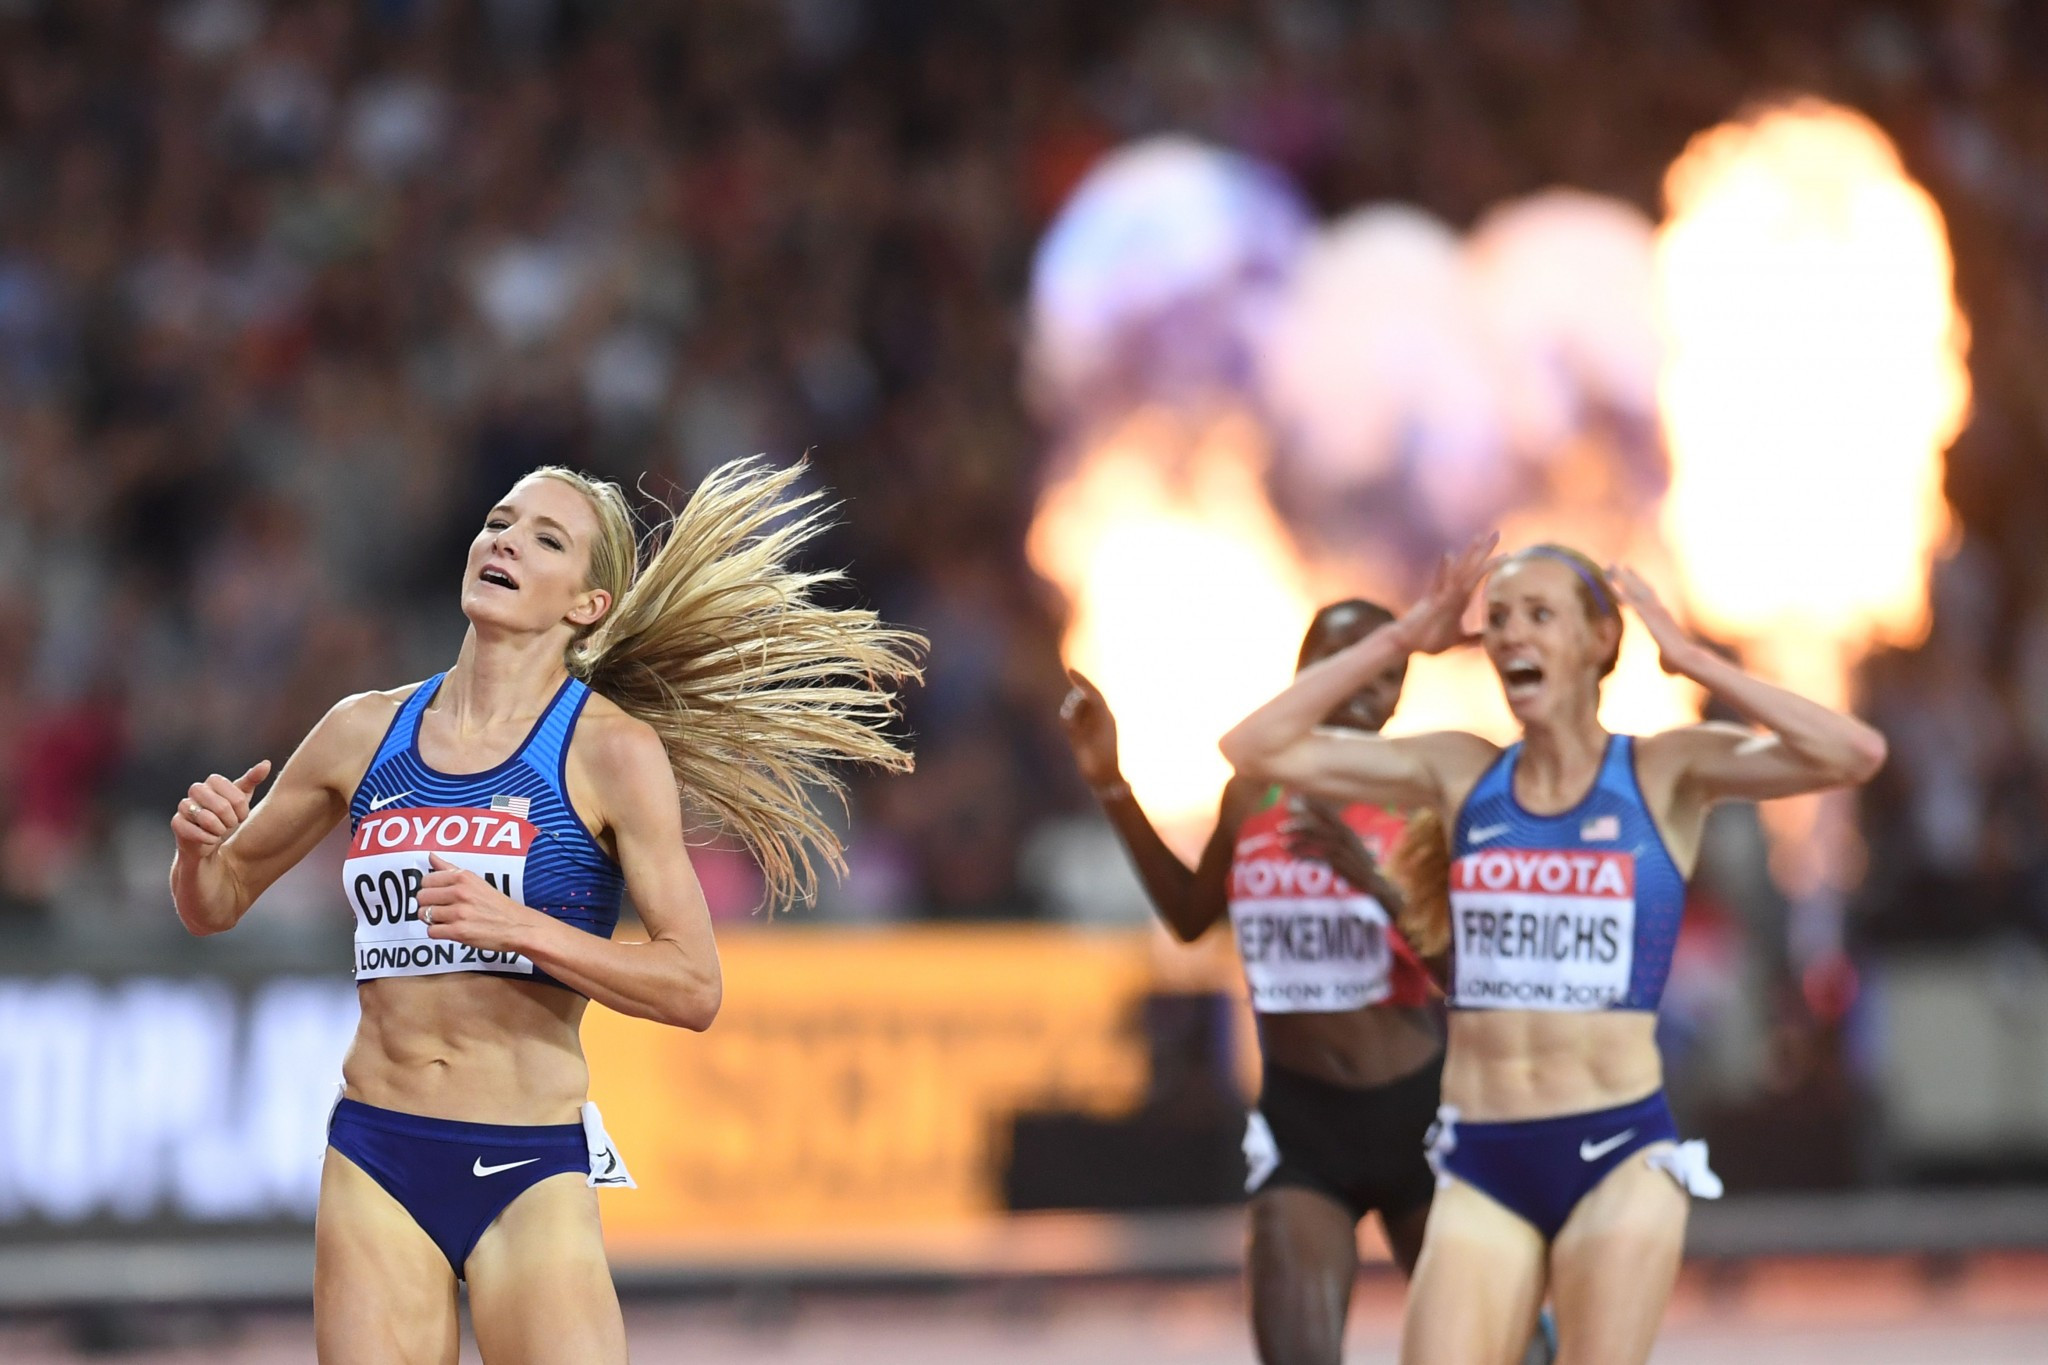 Schippers and Coburn among stars at IAAF World Championships